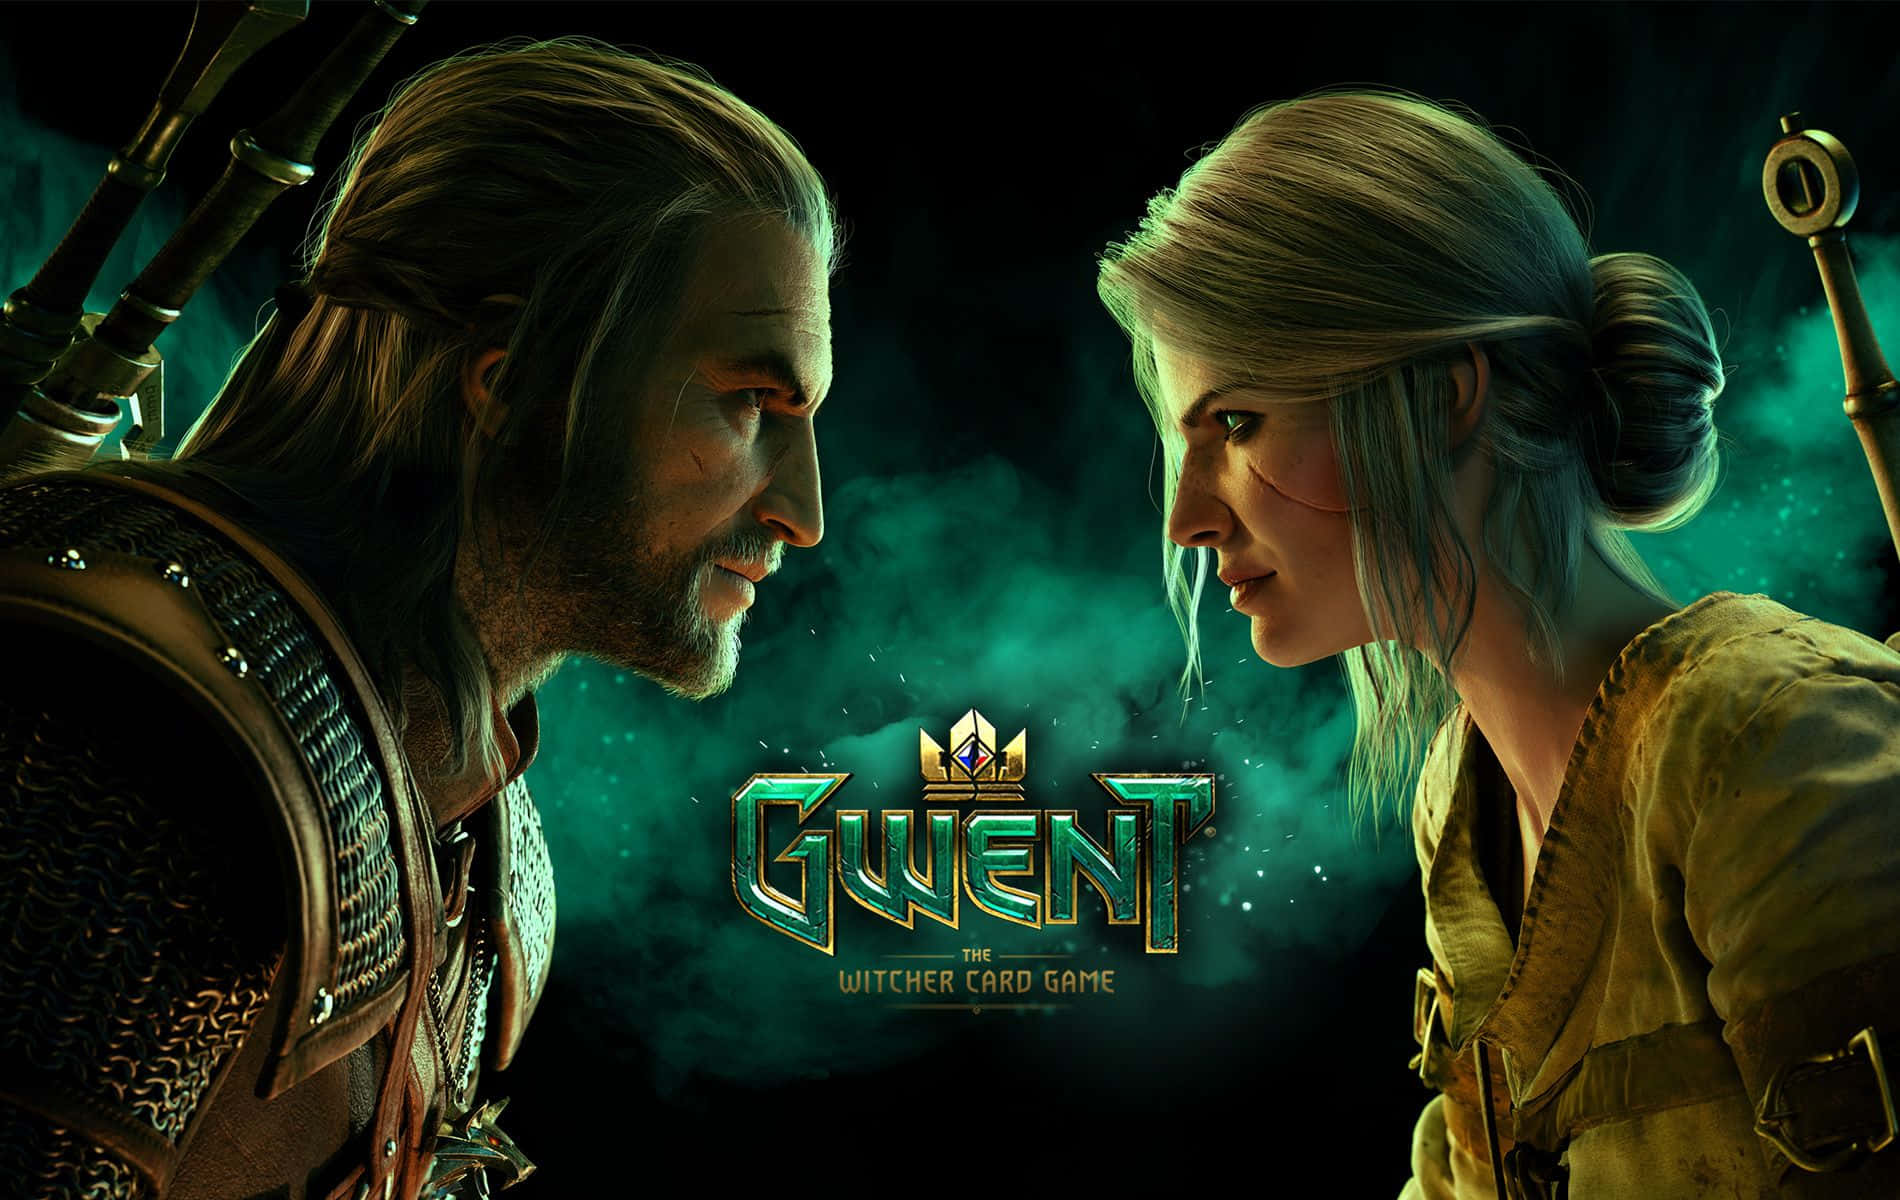 Intense Card Battle In Gwent - The Witcher Card Game Wallpaper